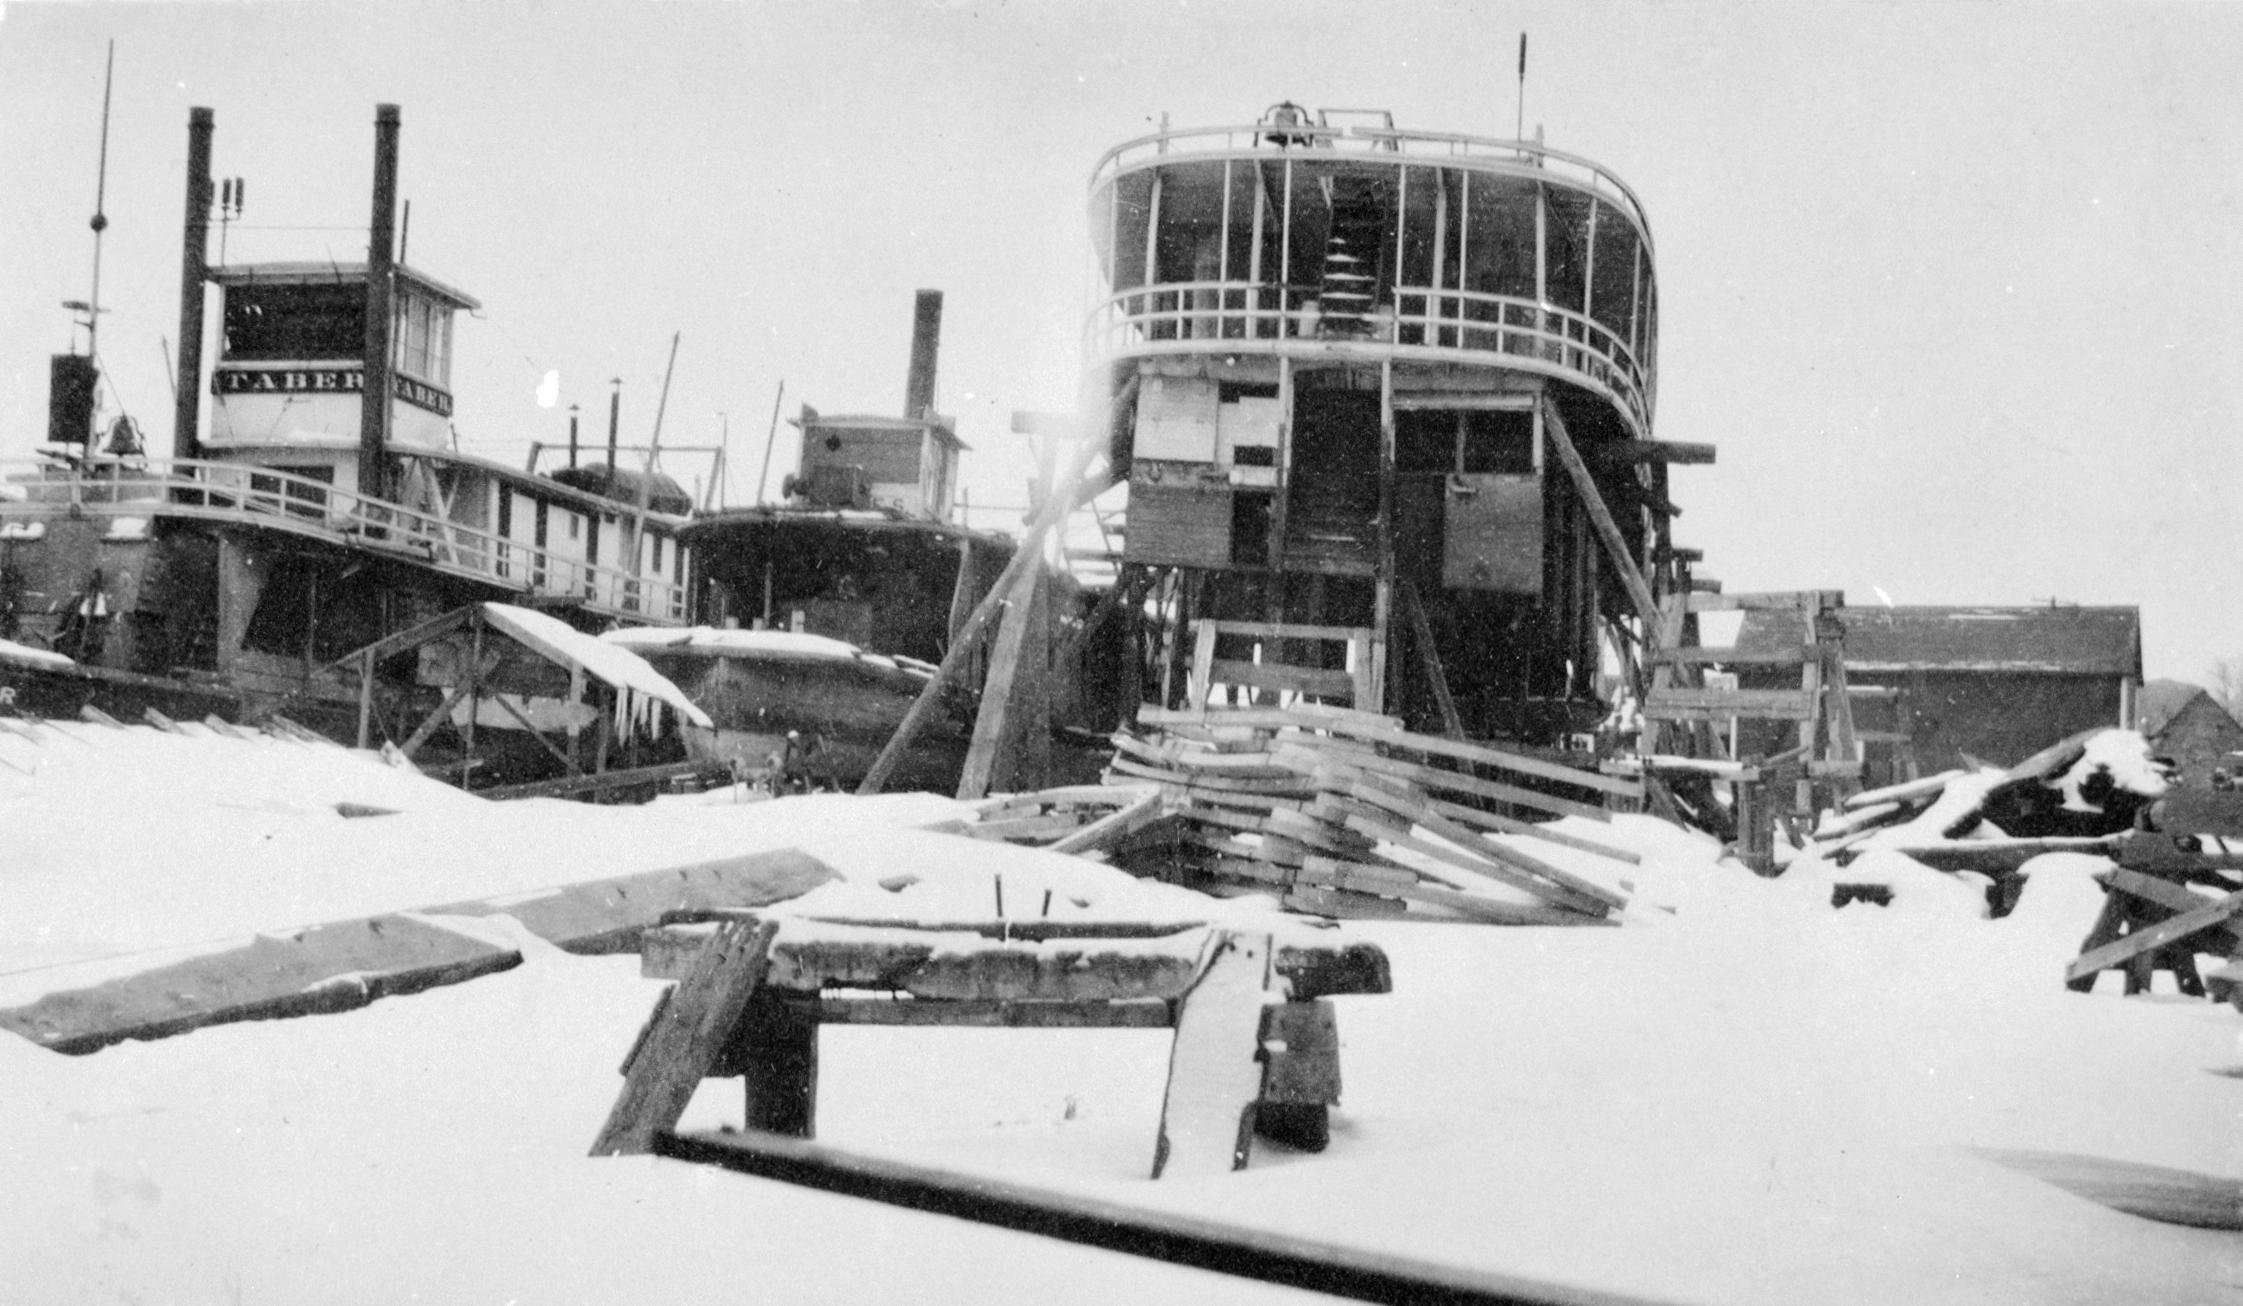 Taber (Towboat, 1910-1913?)